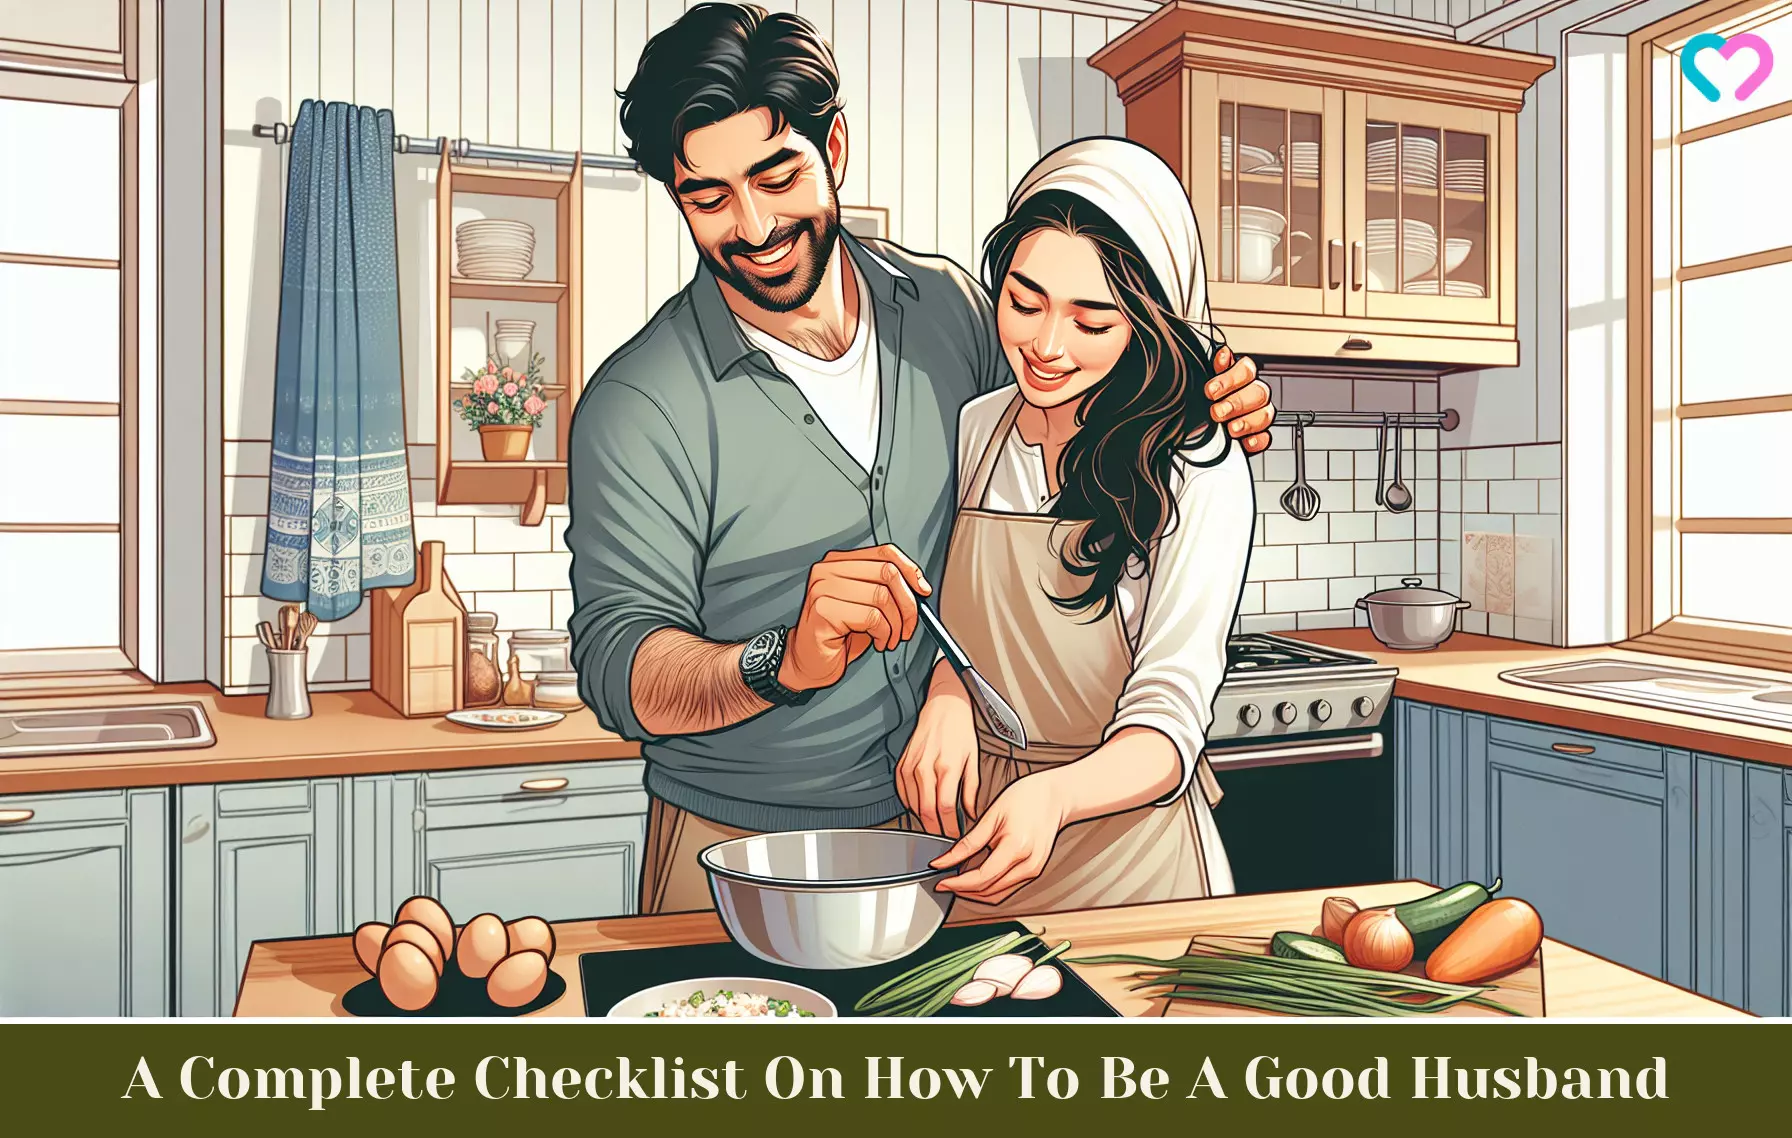 How To Be A Good Husband_illustration